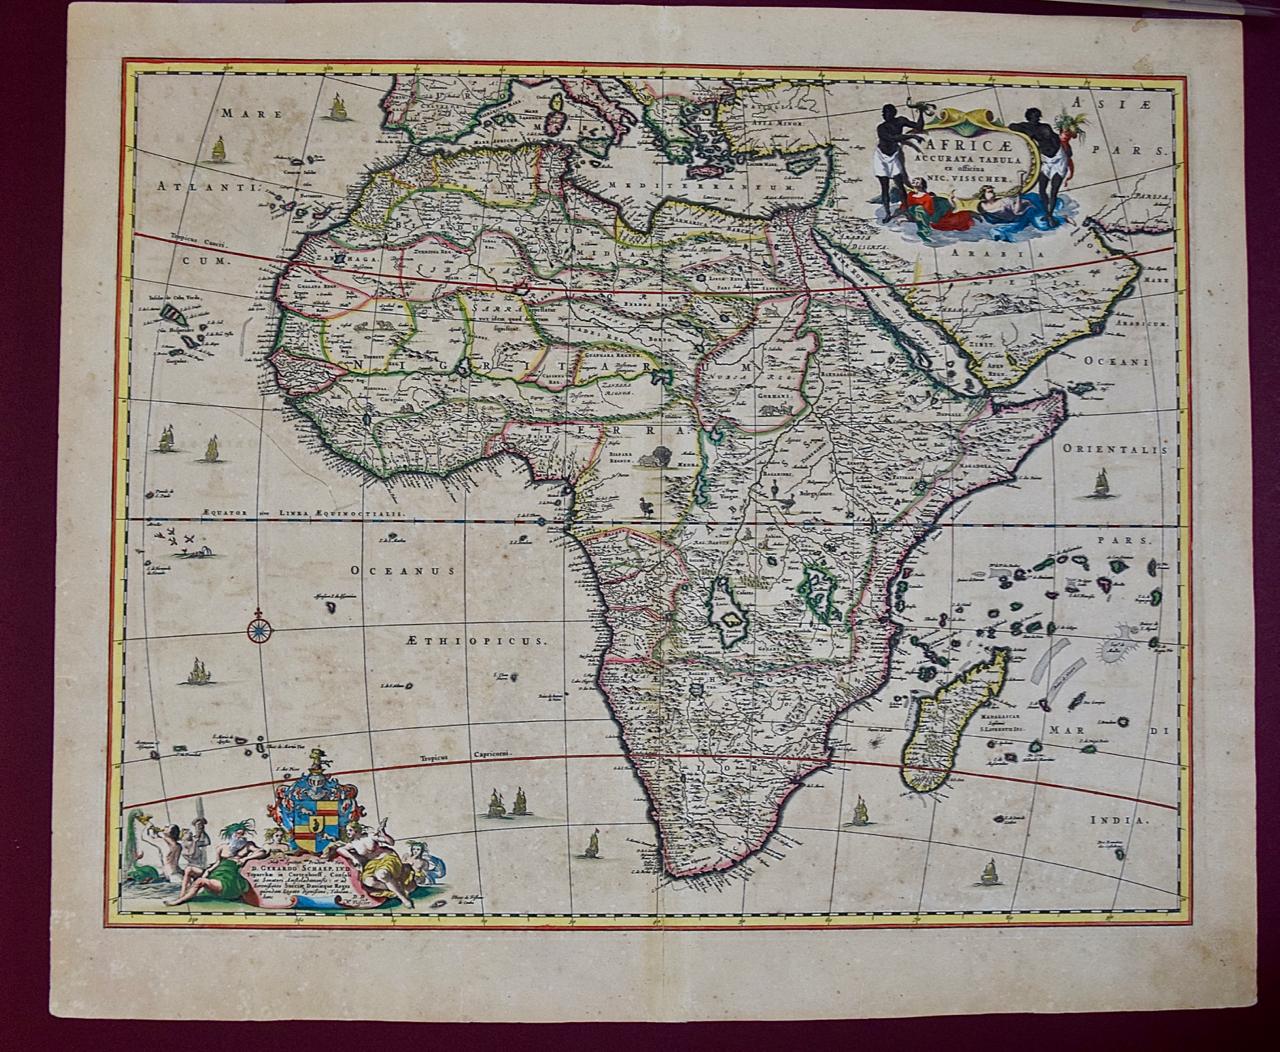 An 18th century hand-colored map of Africa entitled 